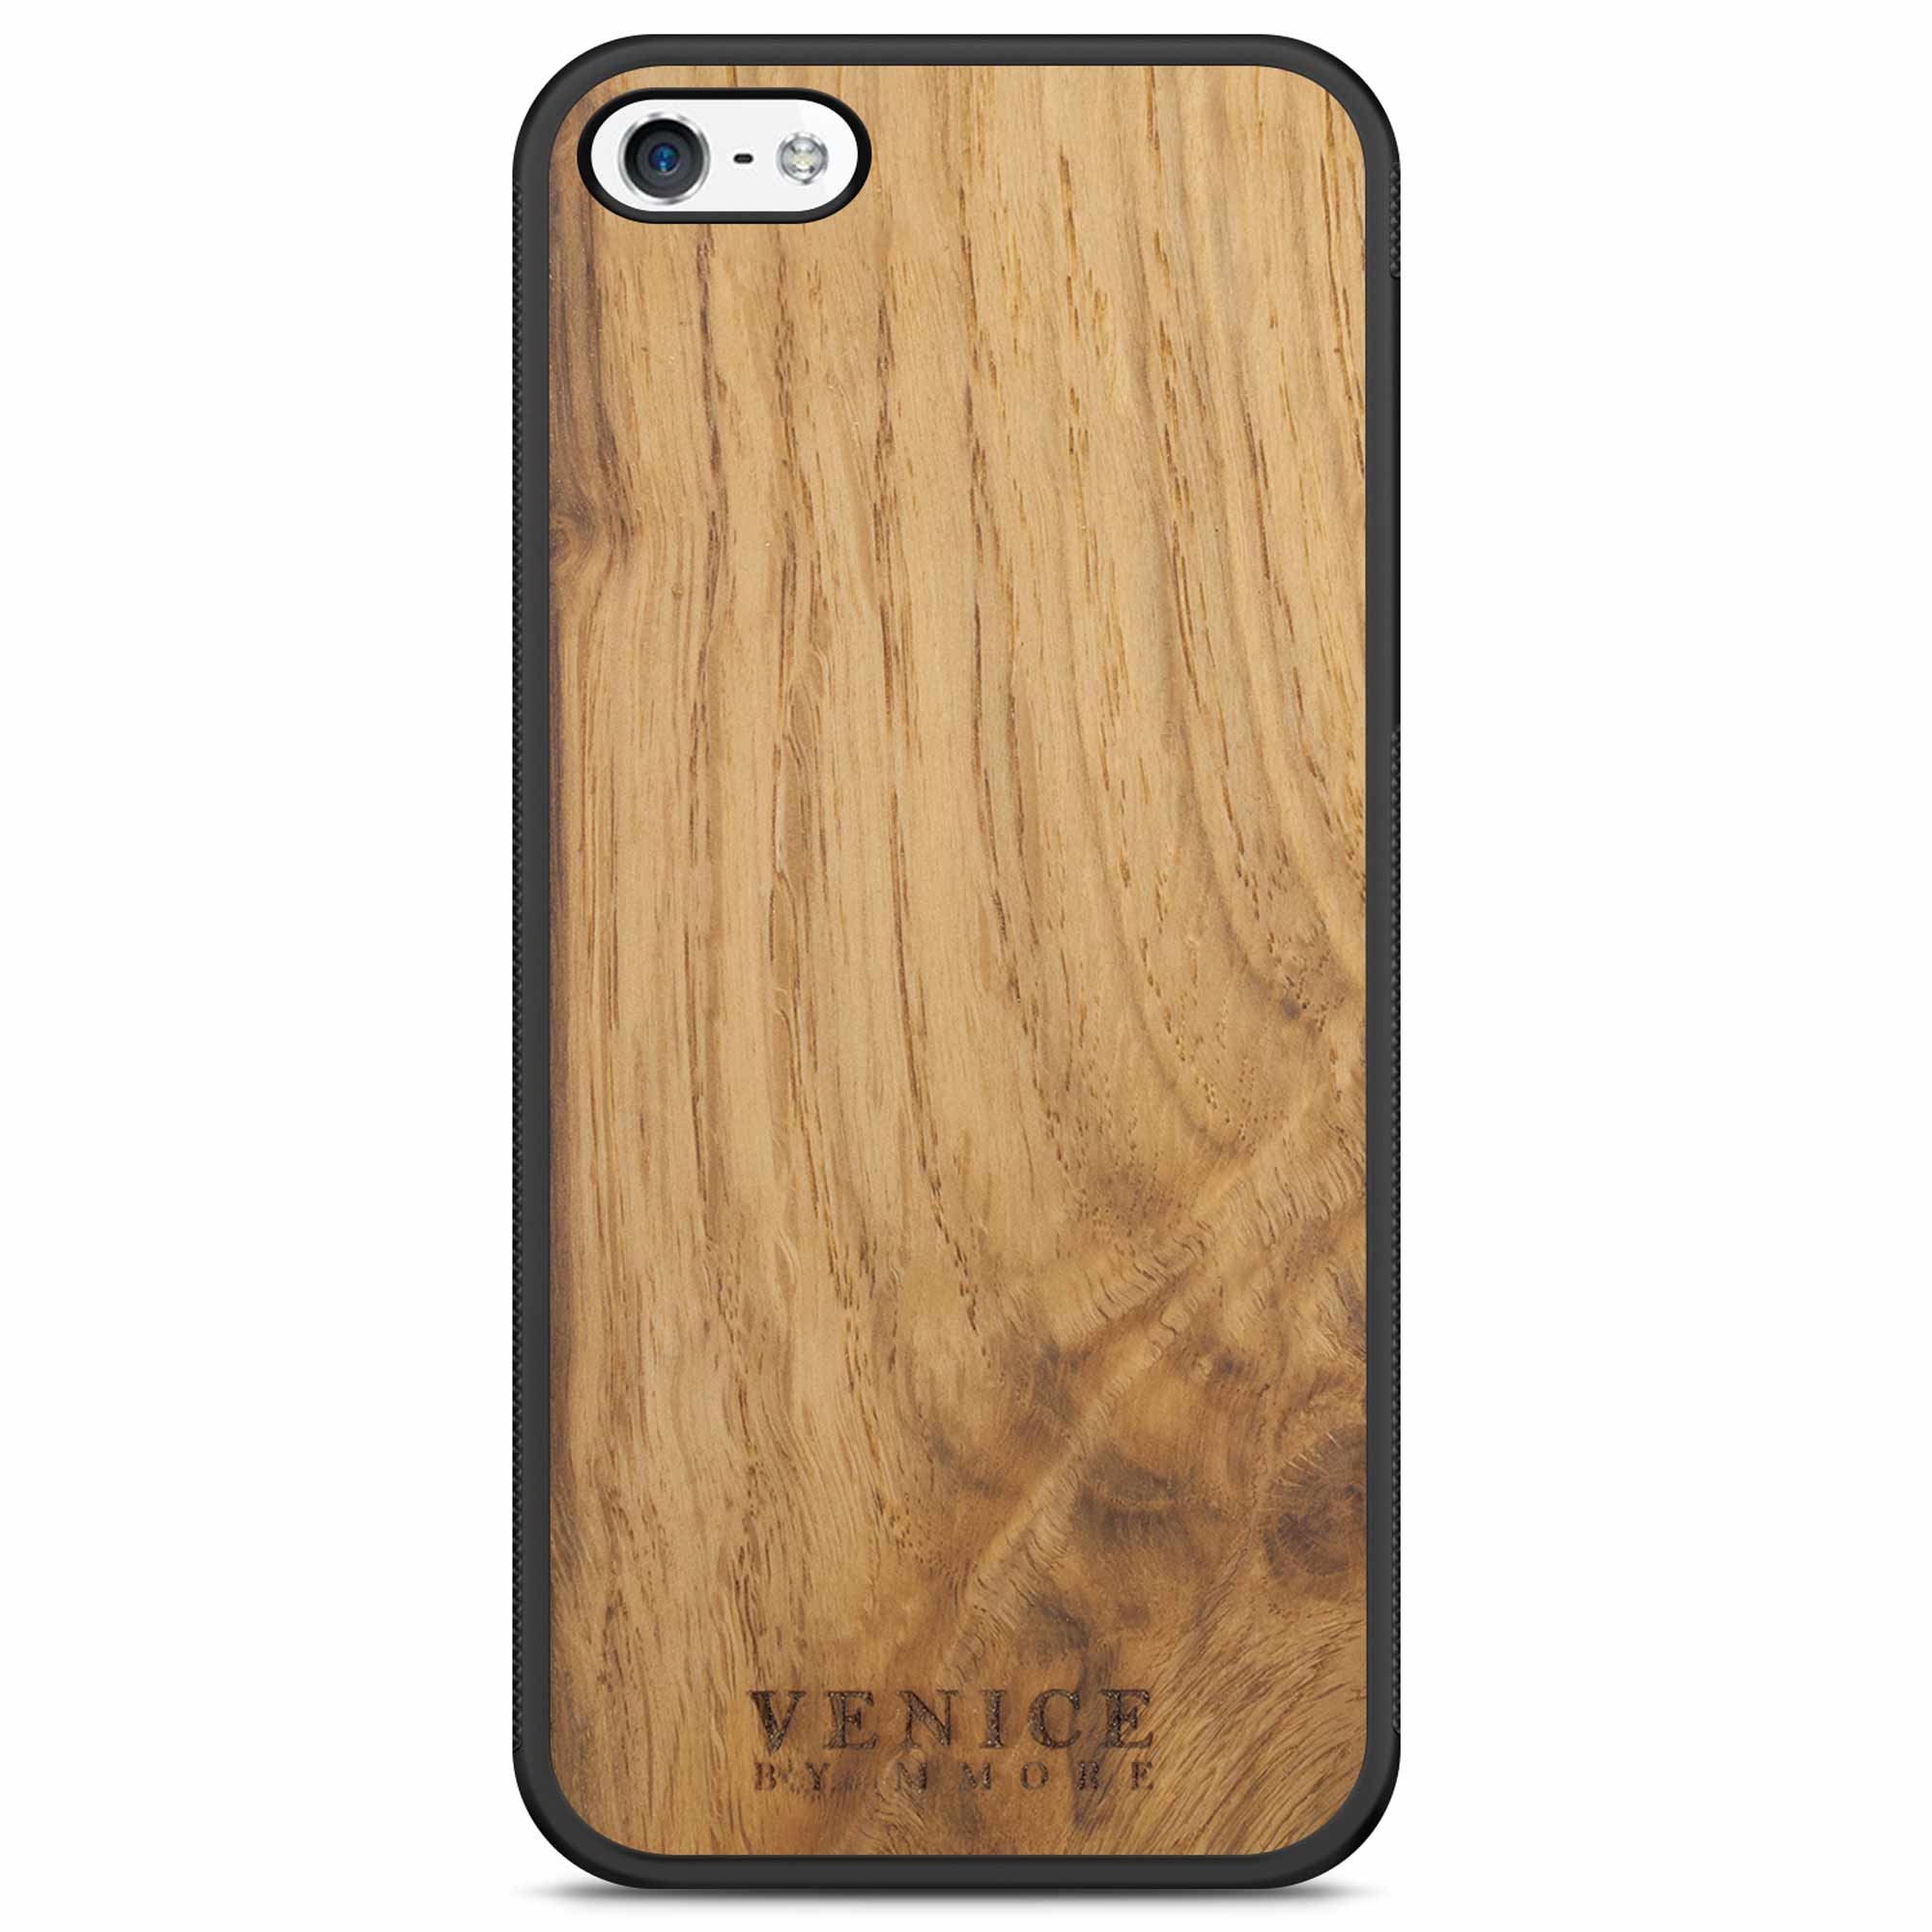 The Venice case - Minimalist lettering Unique handmade wood case / iPhone, Samsung Galaxy and Huawei – MMORE Cases